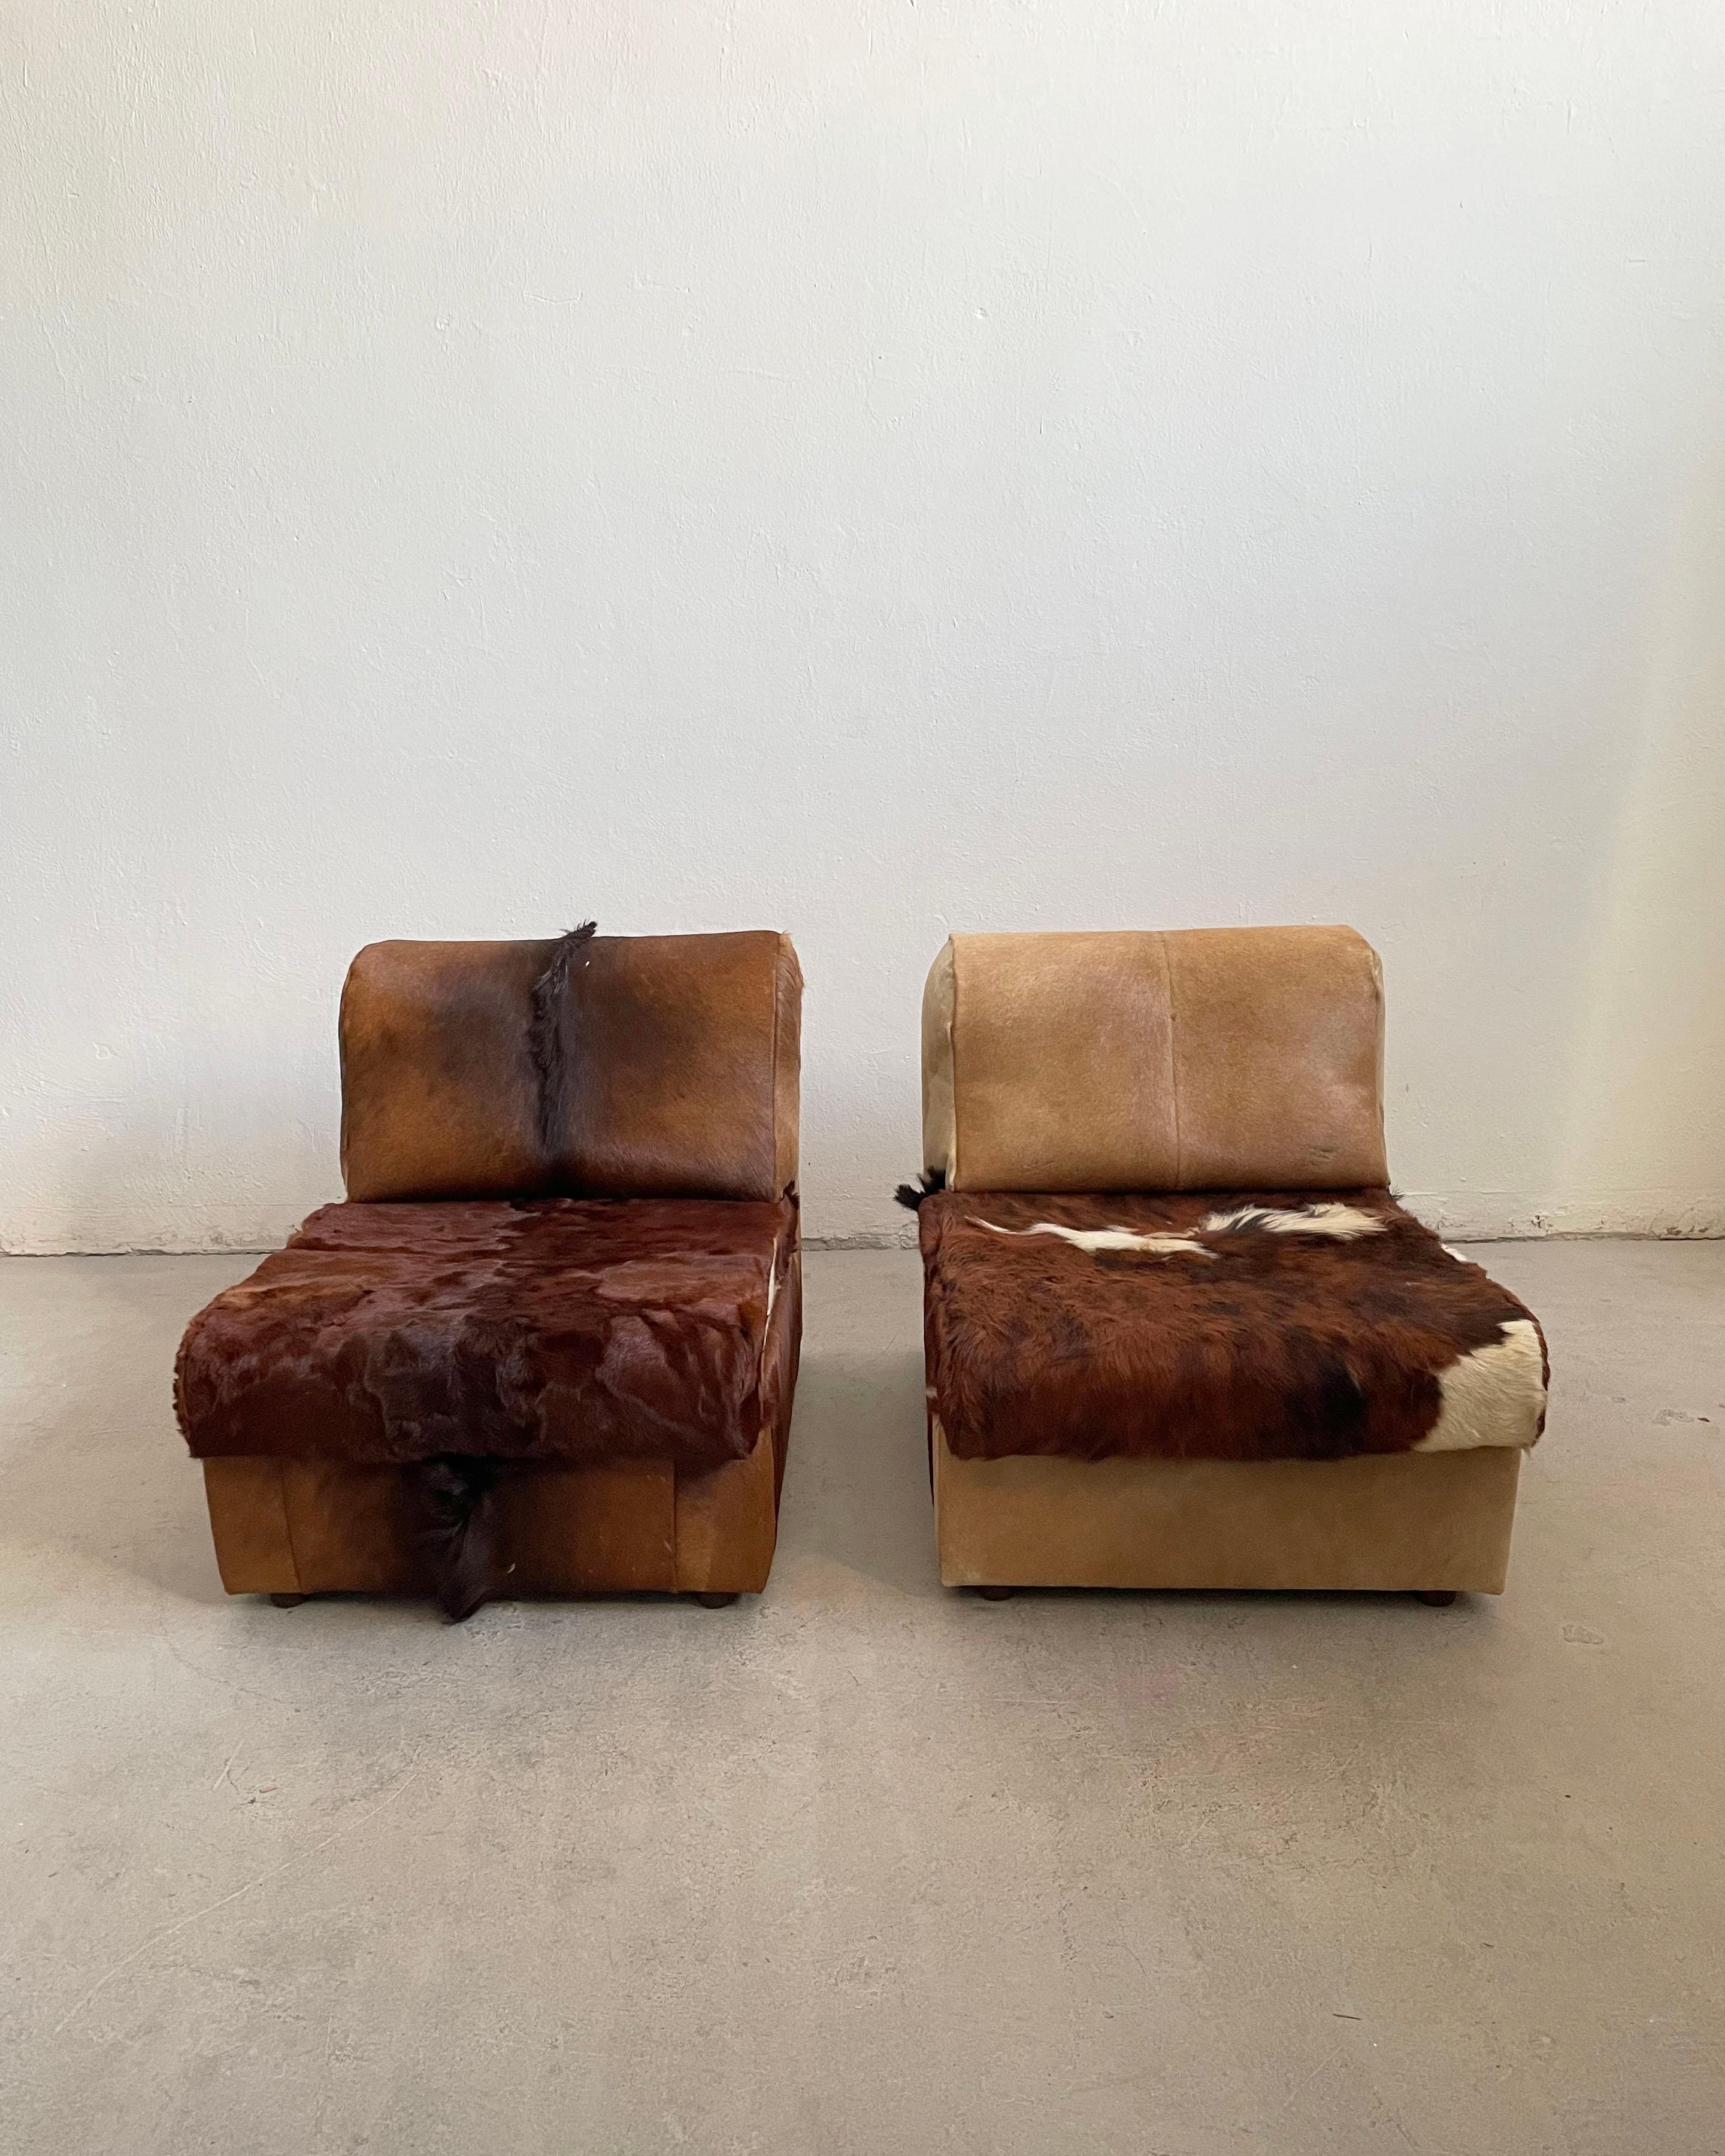 Cowhide Lounge Seating Set, Sofa + Chairs in Cow Hide, Cow Fur, 1970's For Sale